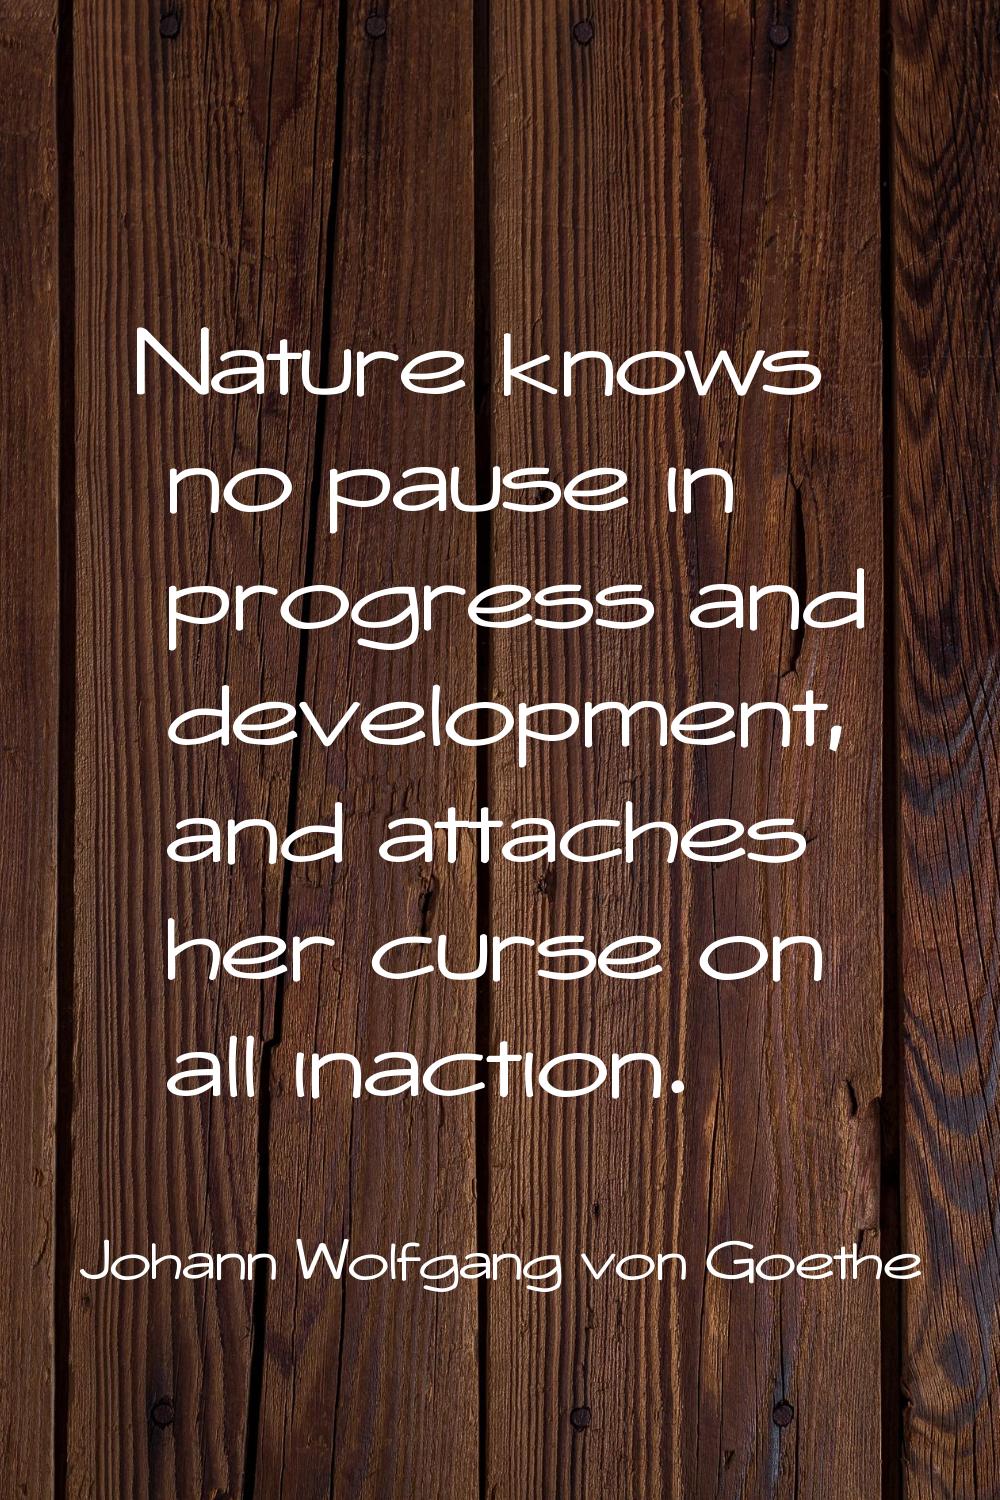 Nature knows no pause in progress and development, and attaches her curse on all inaction.